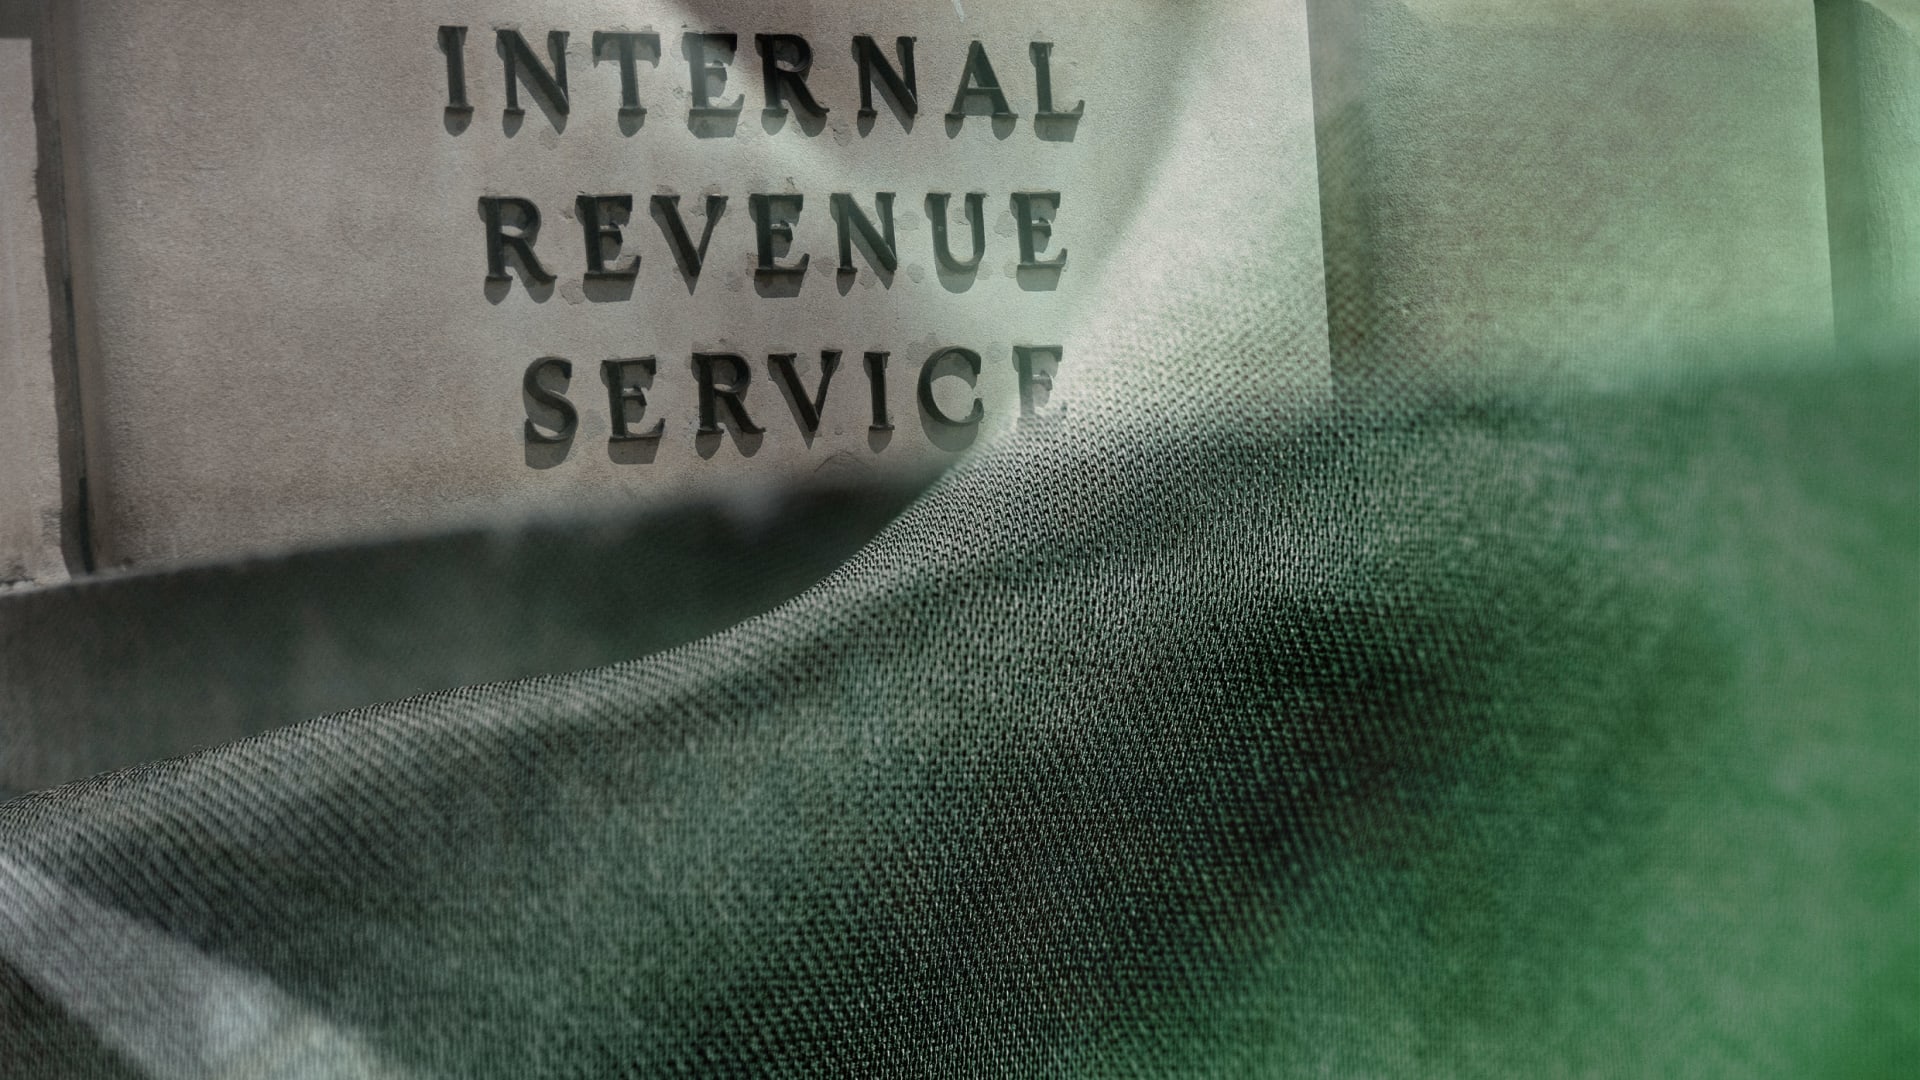 IRS free direct file is a nice idea, but lousy customer service could undermine the whole thing